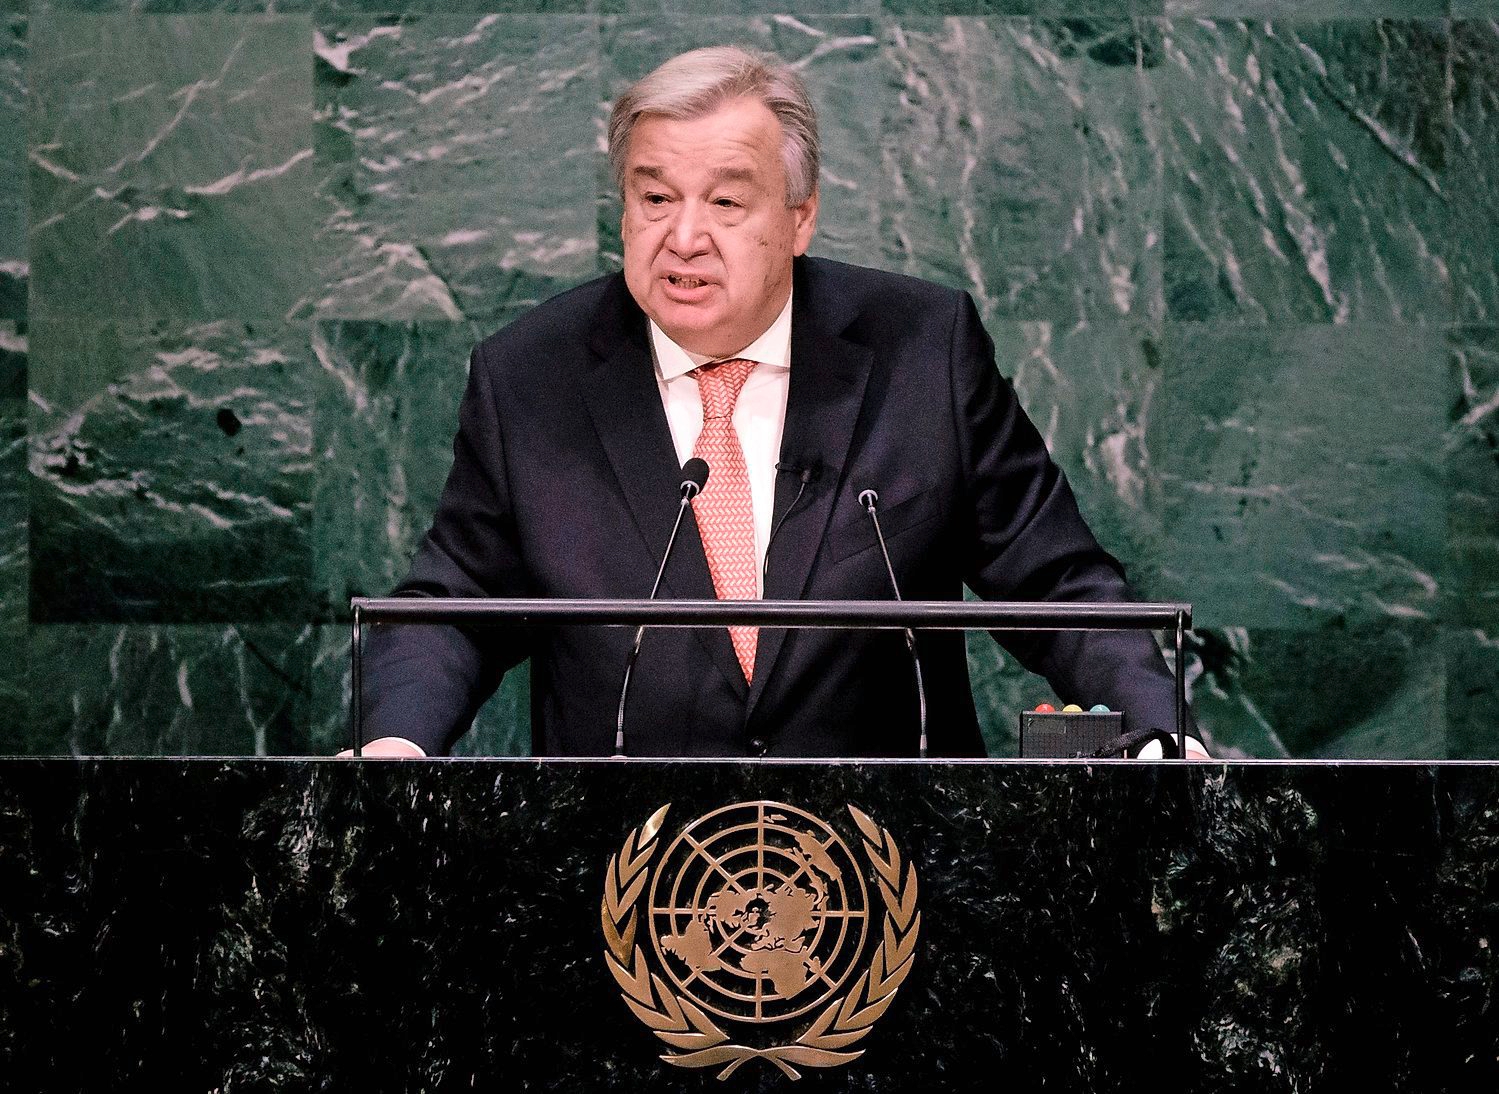 epa05672964 Secretary-General designate Antonio Guterres speaks after he was sworn in as the new Secretary-General of the United Nations during a ceremony in the General Assembly hall at United Nations headquarters in New York, New York, USA, 12 December 2016. Guterres will officially take over the position from Ban Ki-moon on 01 January 2017.  EPA/JUSTIN LANE USA UN SECRETARY GENERAL GUTERRES